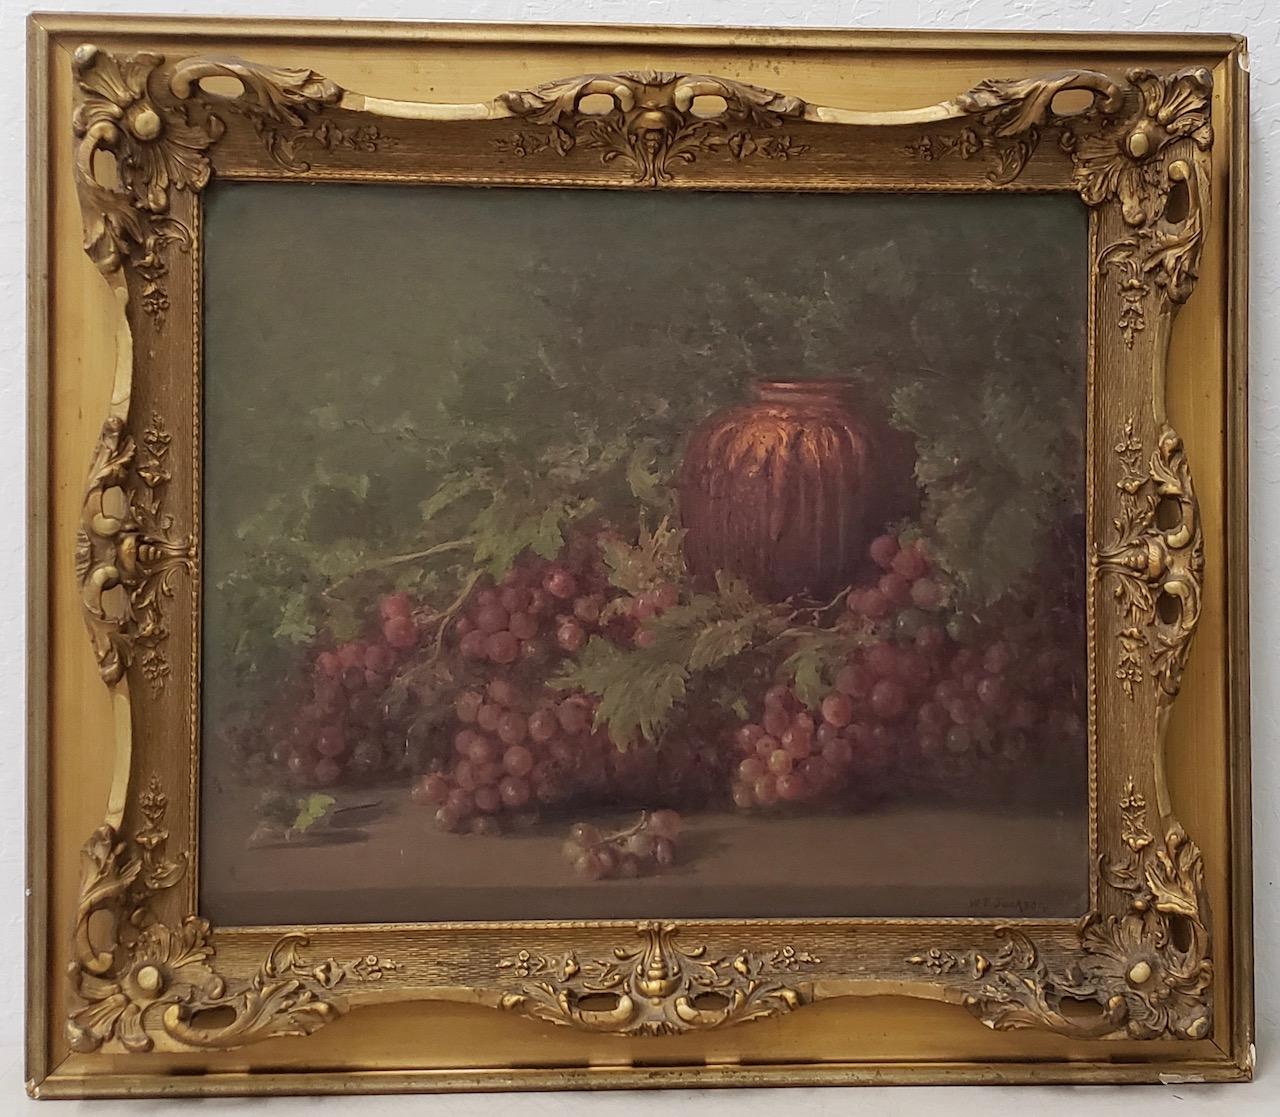 William Franklin Jackson (1850-1936) Still Life with Vase and Grapes c.1900

Rare still life painting by listed California artist William Franklin Jackson.

A remarkable still life with grapes on a table with a vase.

Original oil on board.